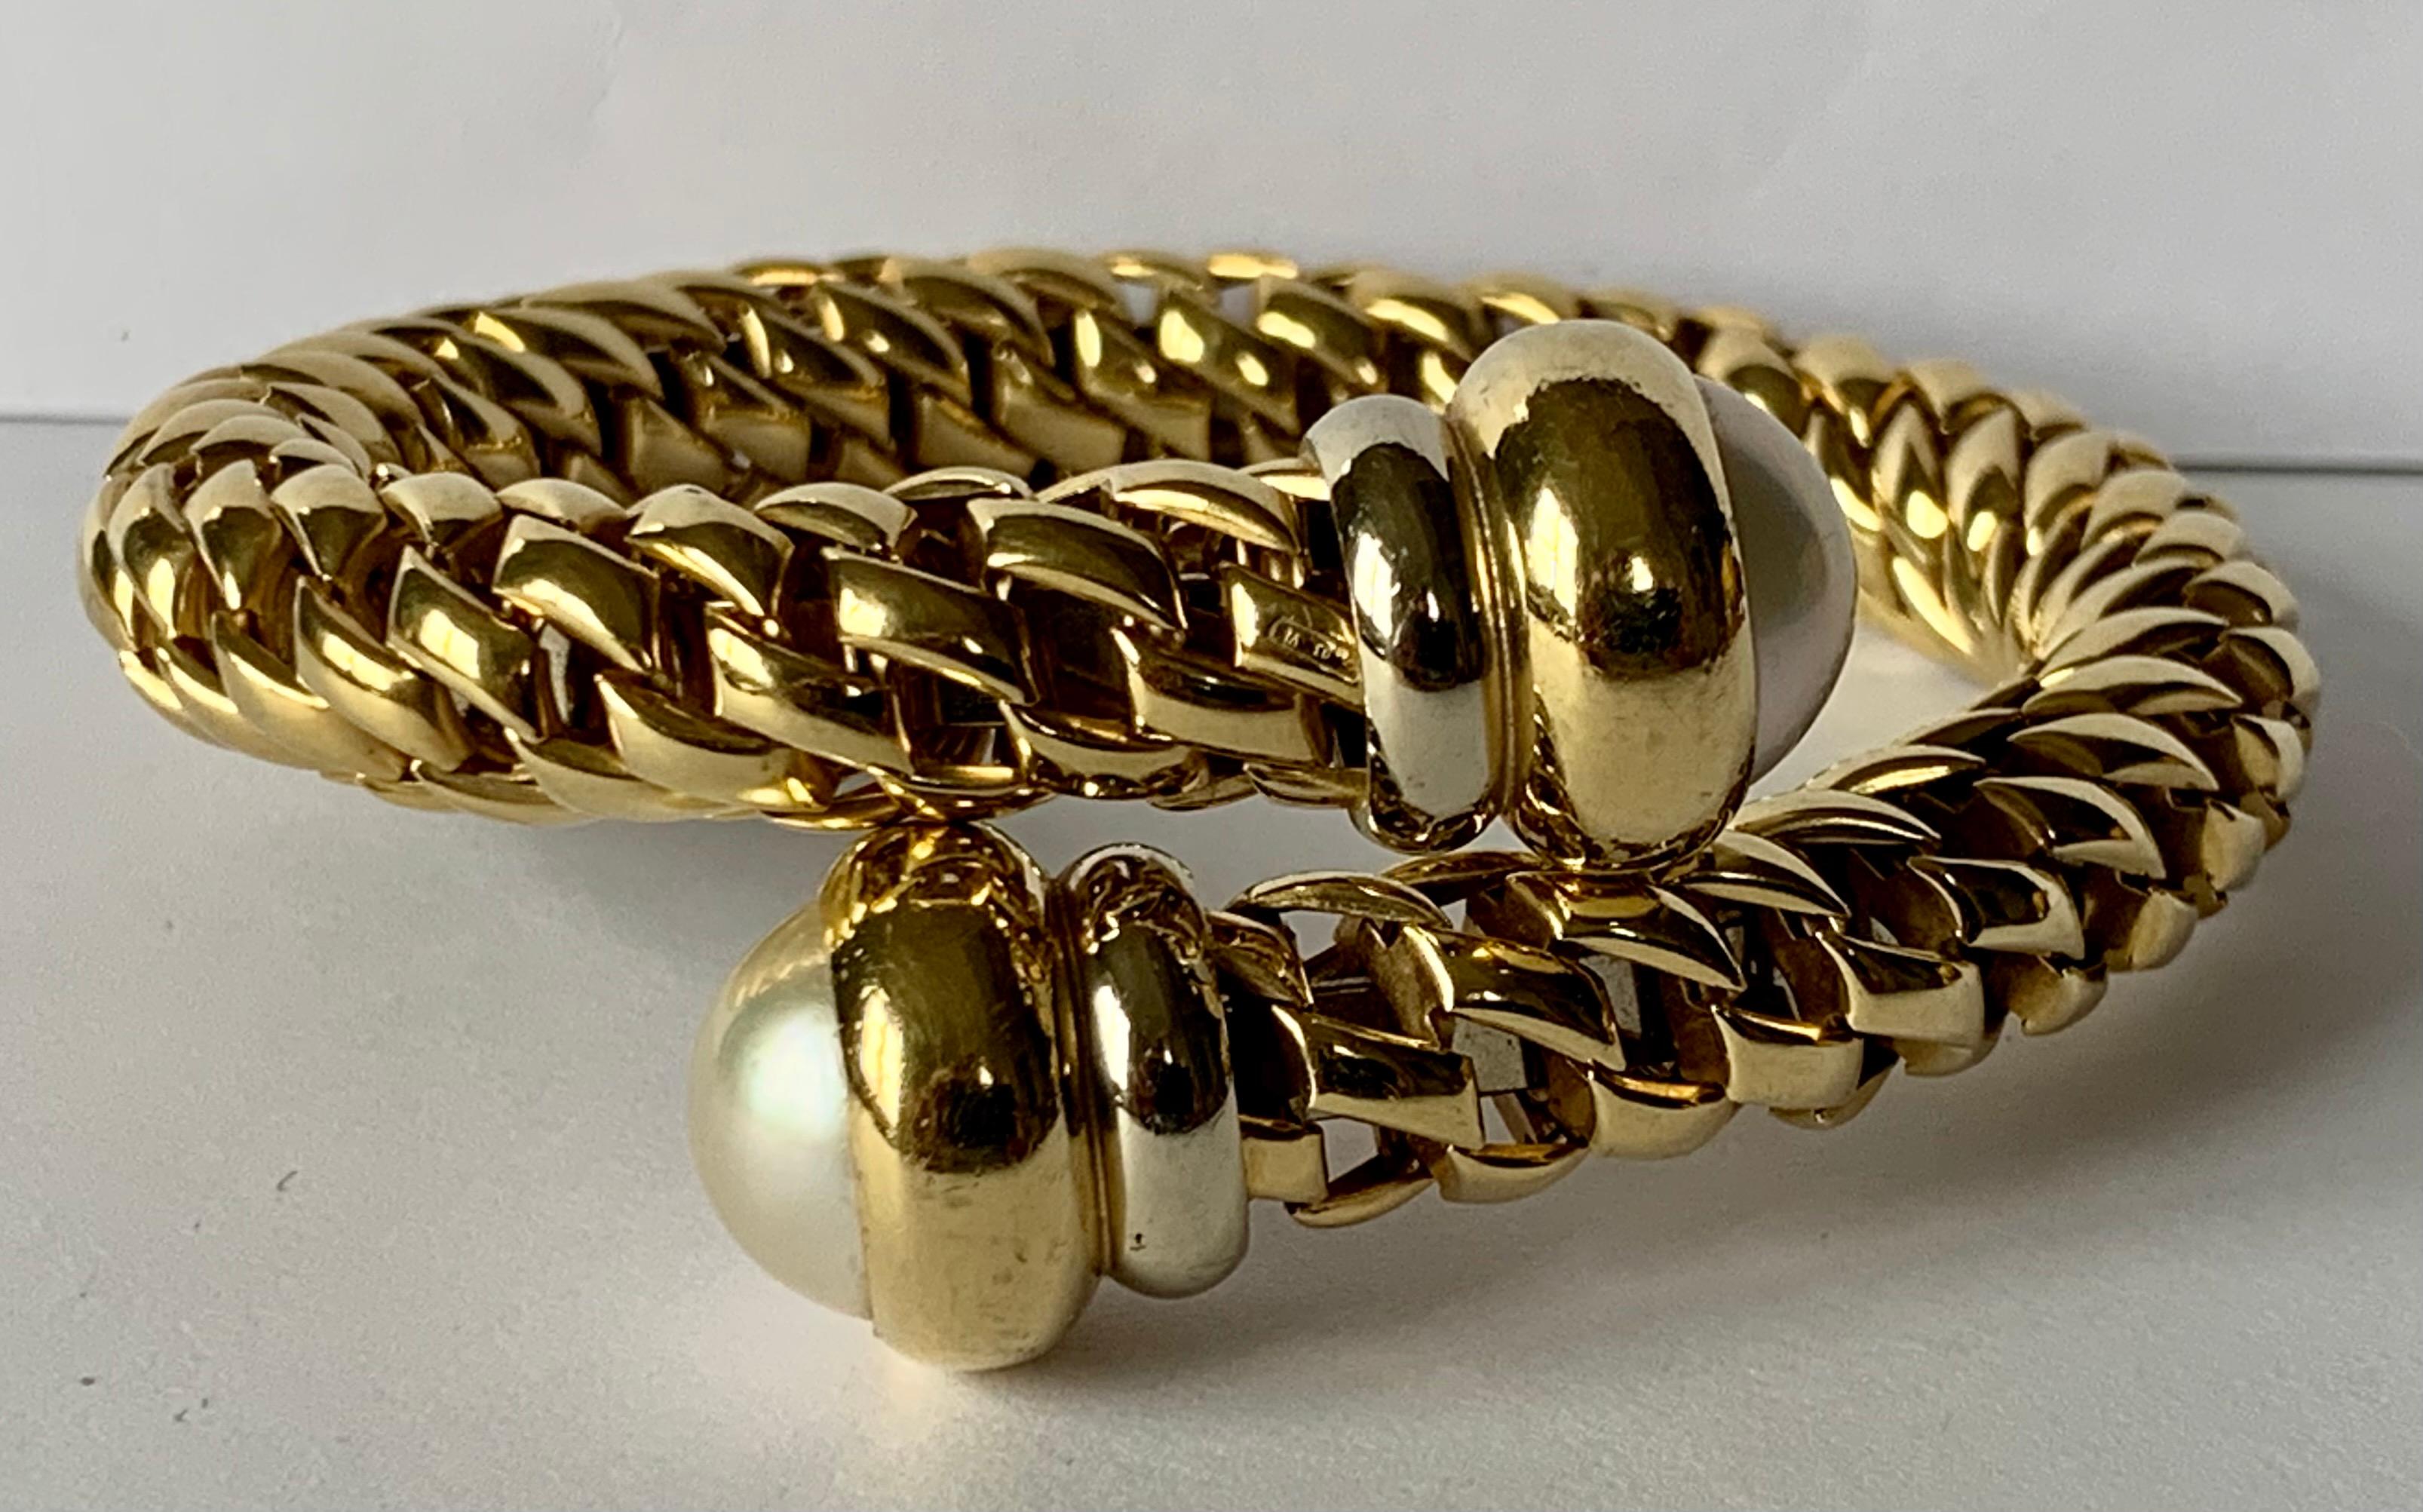 Timeless Italian 18 K yellow Gold coil bracelet by the designer Fope. The flexible bracelet features cultured pearl endcaps. The bracelet measures 5.5 cm in diameter and can fit many wrist sizes.
FOPE is a family-owned company that has proudly been